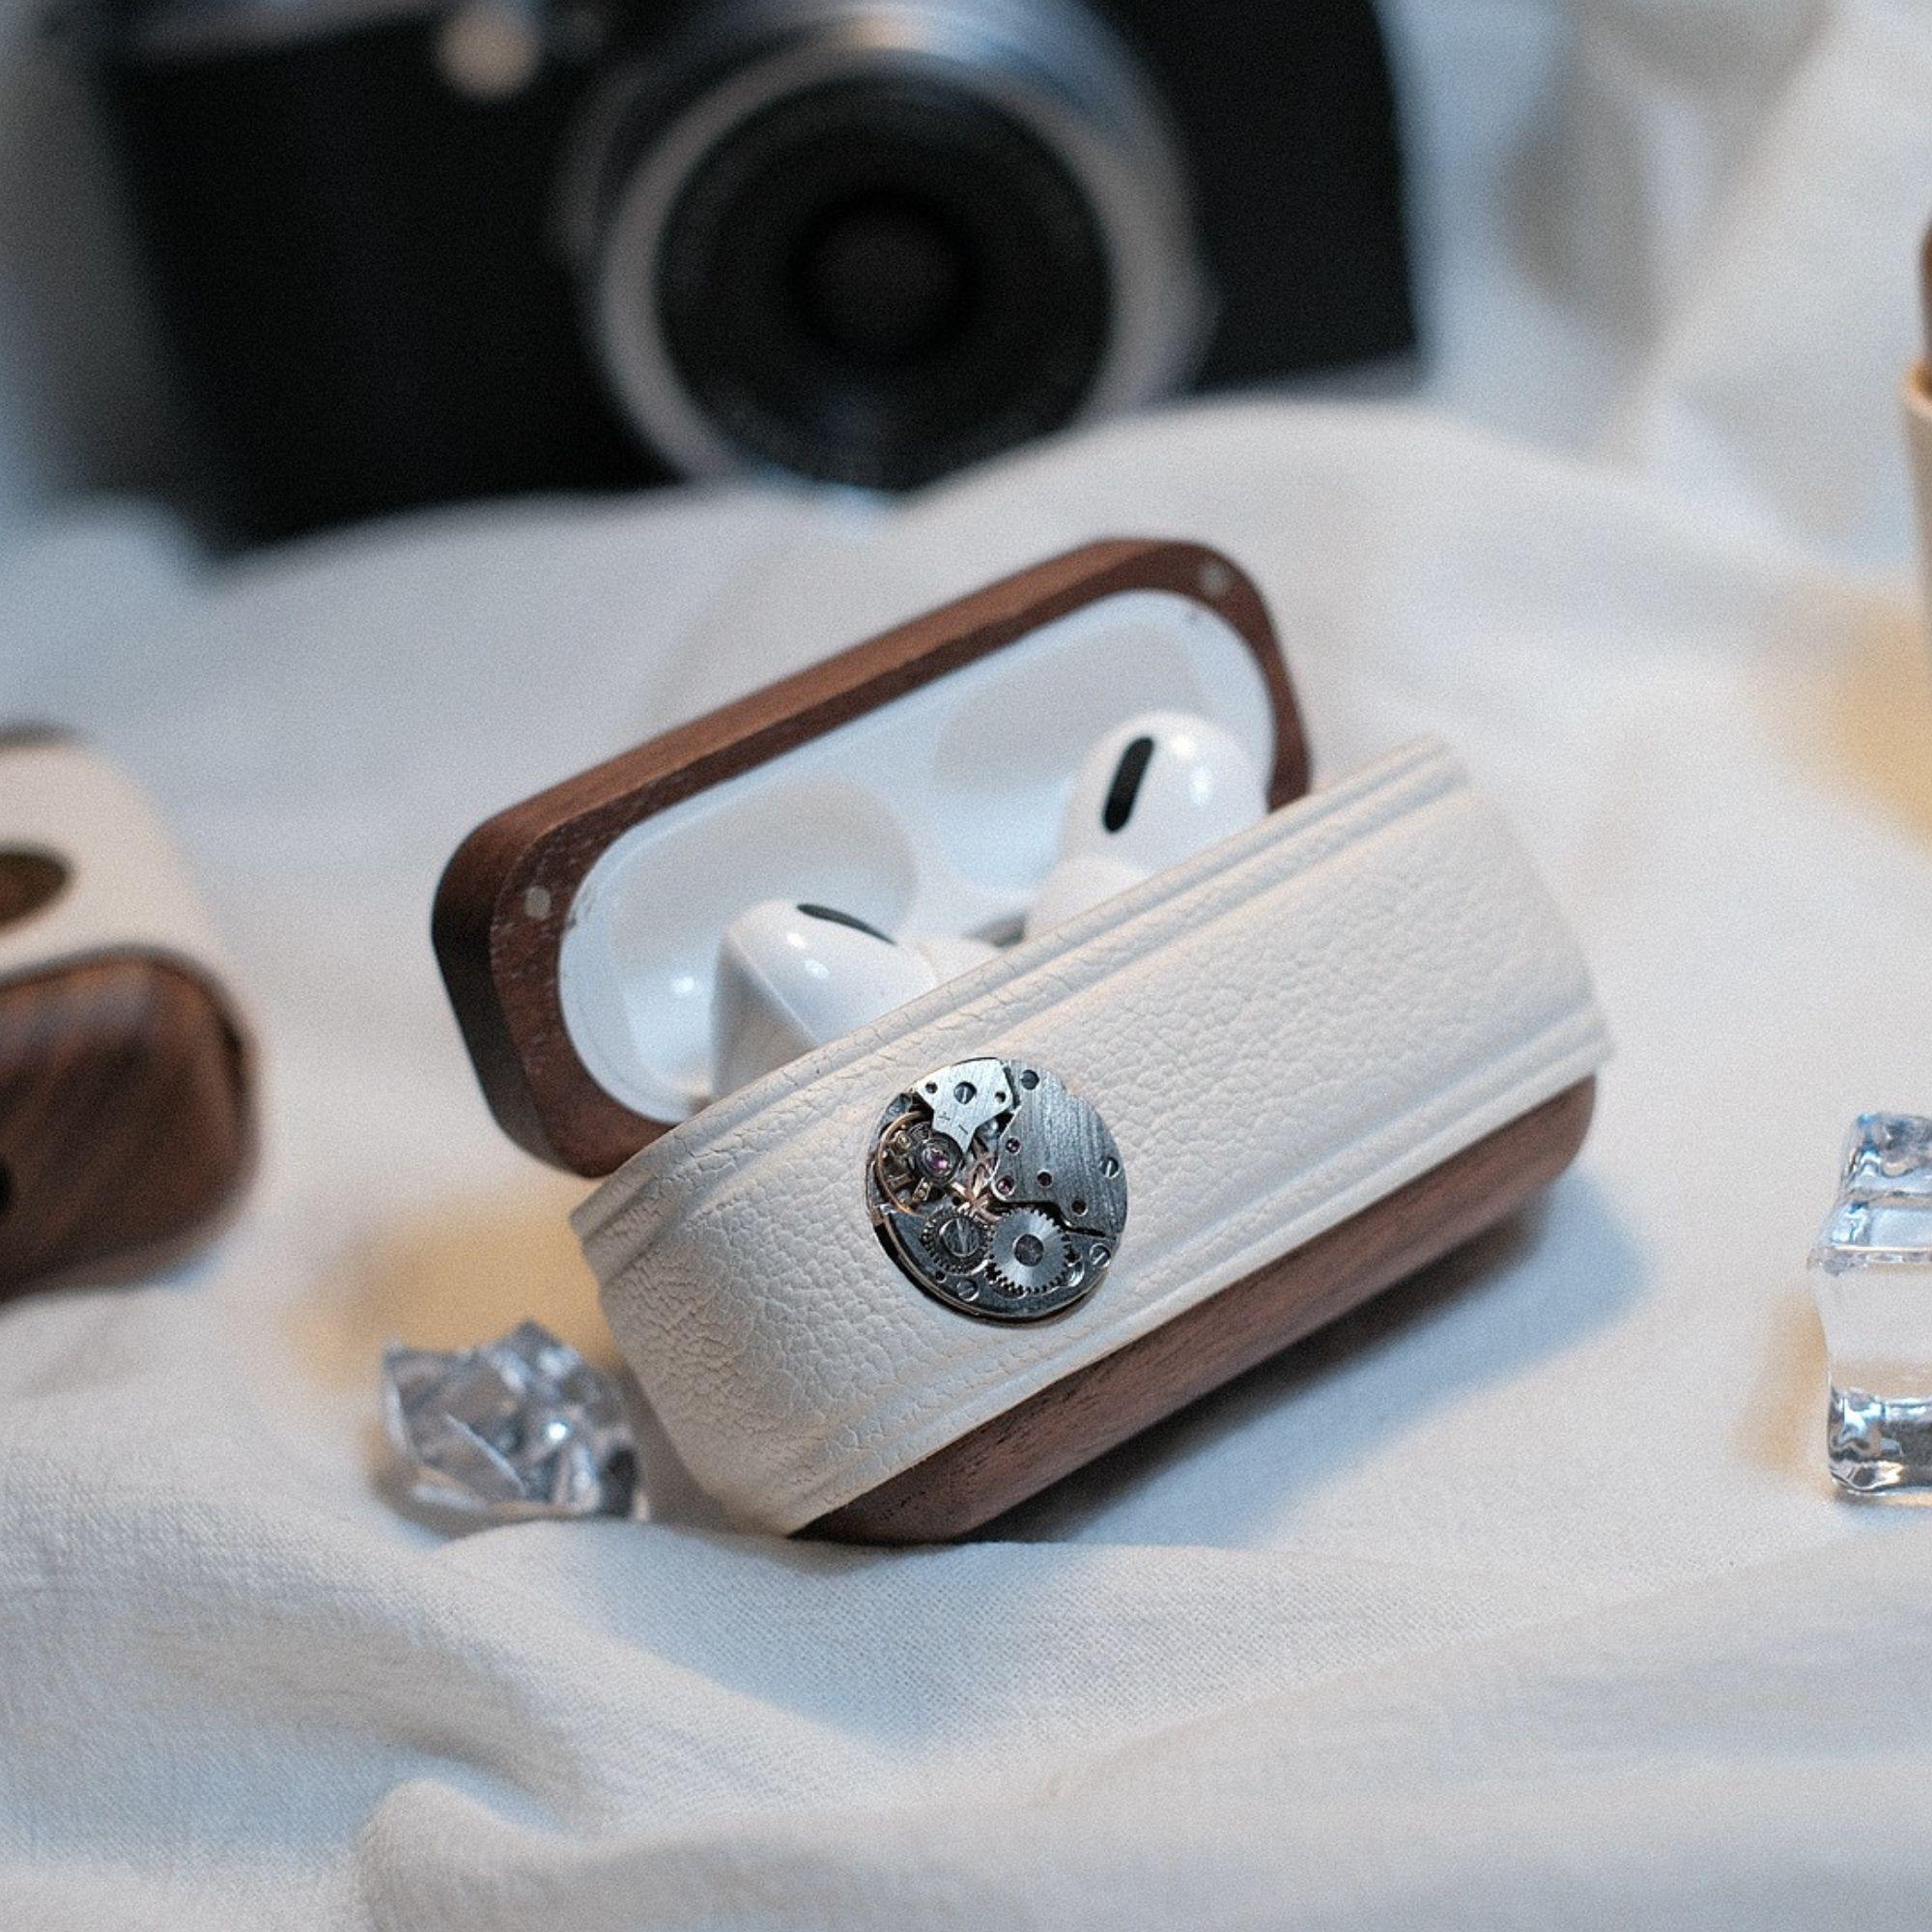 Airpod case Handmade luxury Grey & Brown AirPod case. Golden hardware. Fits  both first generation AirPods and AirPod Pros.